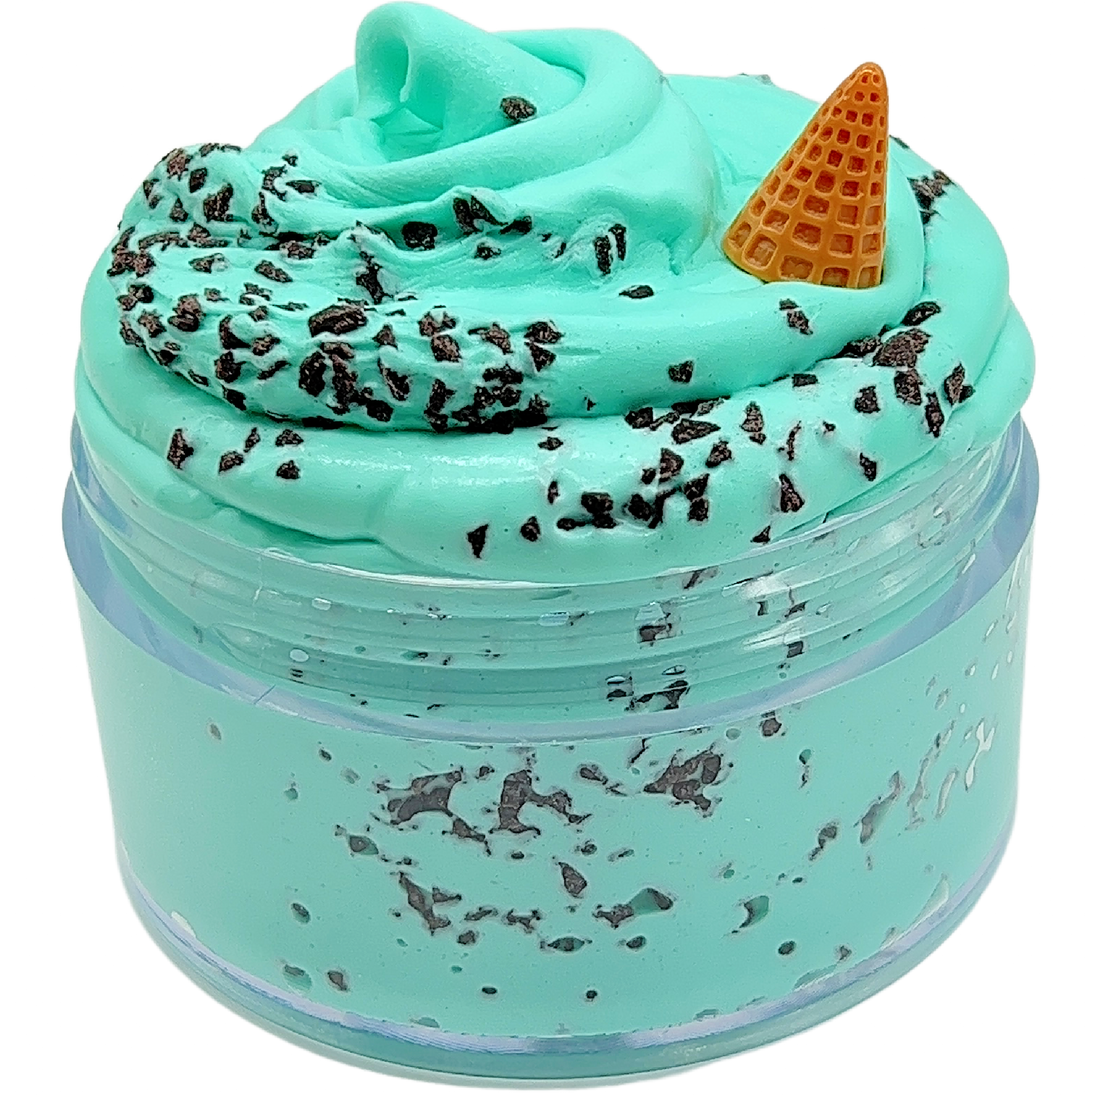 MELTED MINT CHIP ICE CREAM